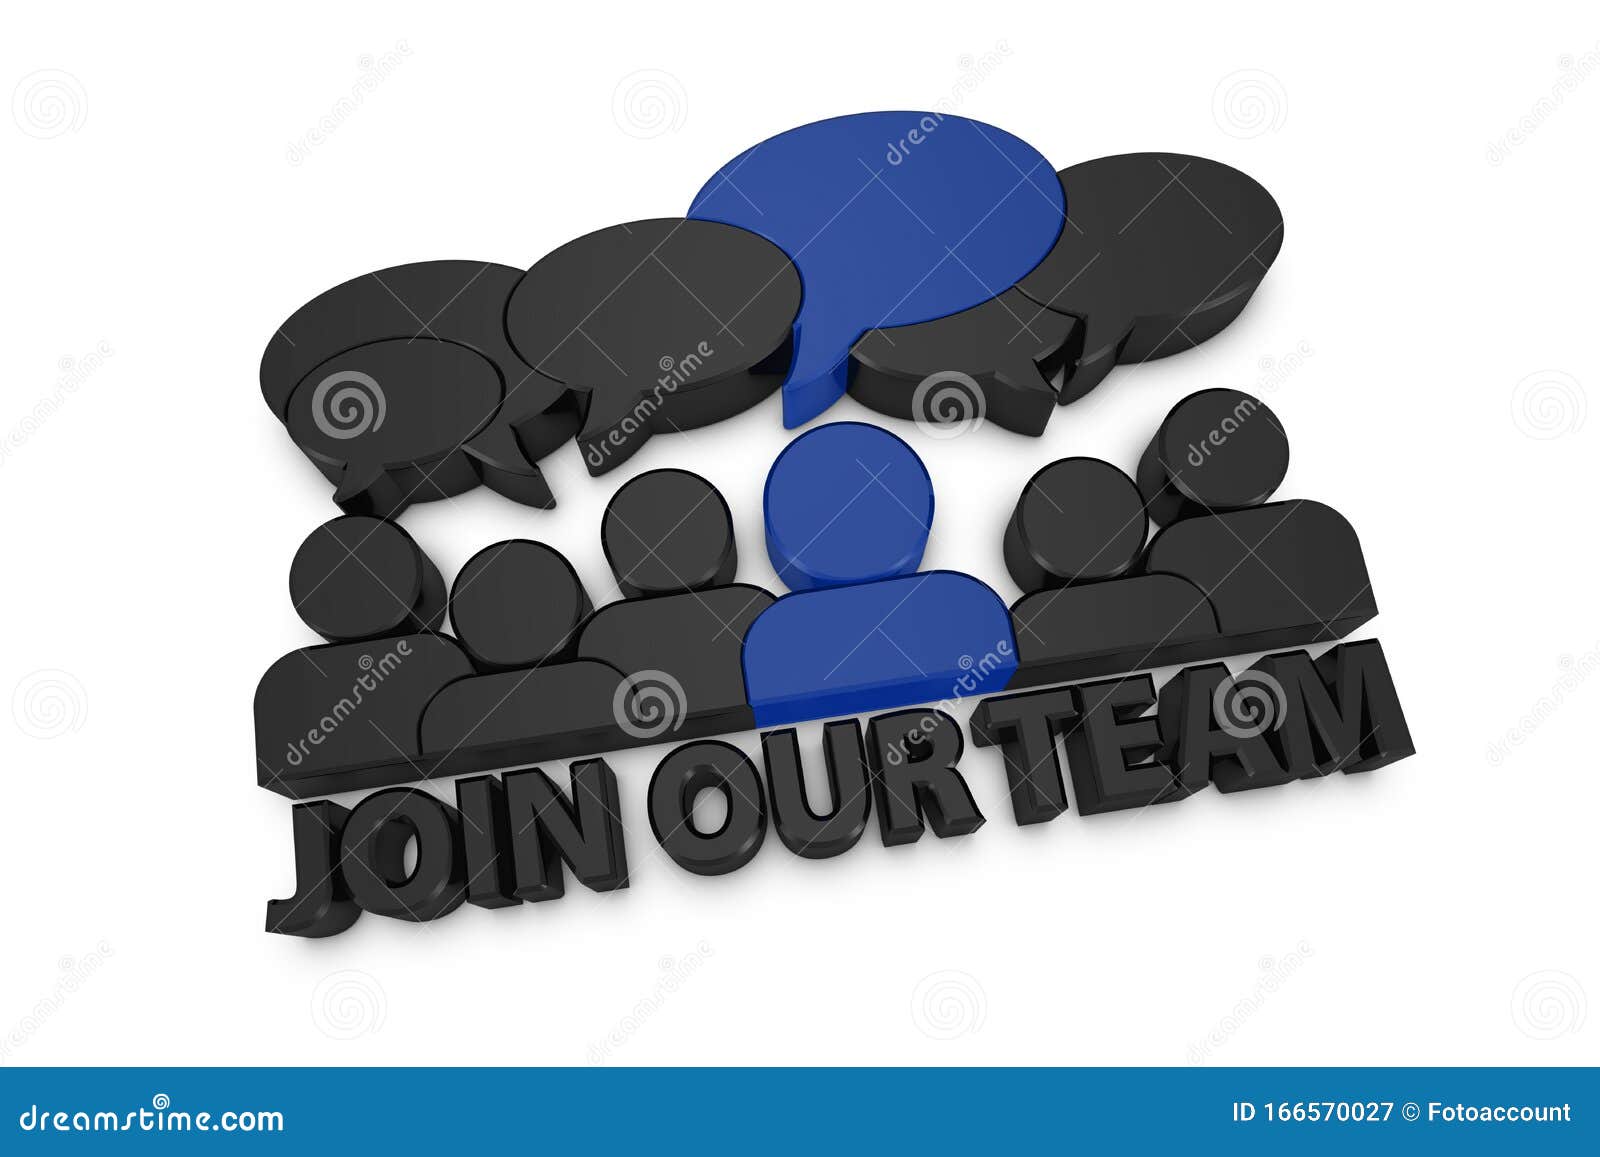 Join Our Team Concept Banner with Group of People - Black and Blue 3D  Illustration Isolated on White Background Stock Illustration - Illustration  of icon, join: 166570027